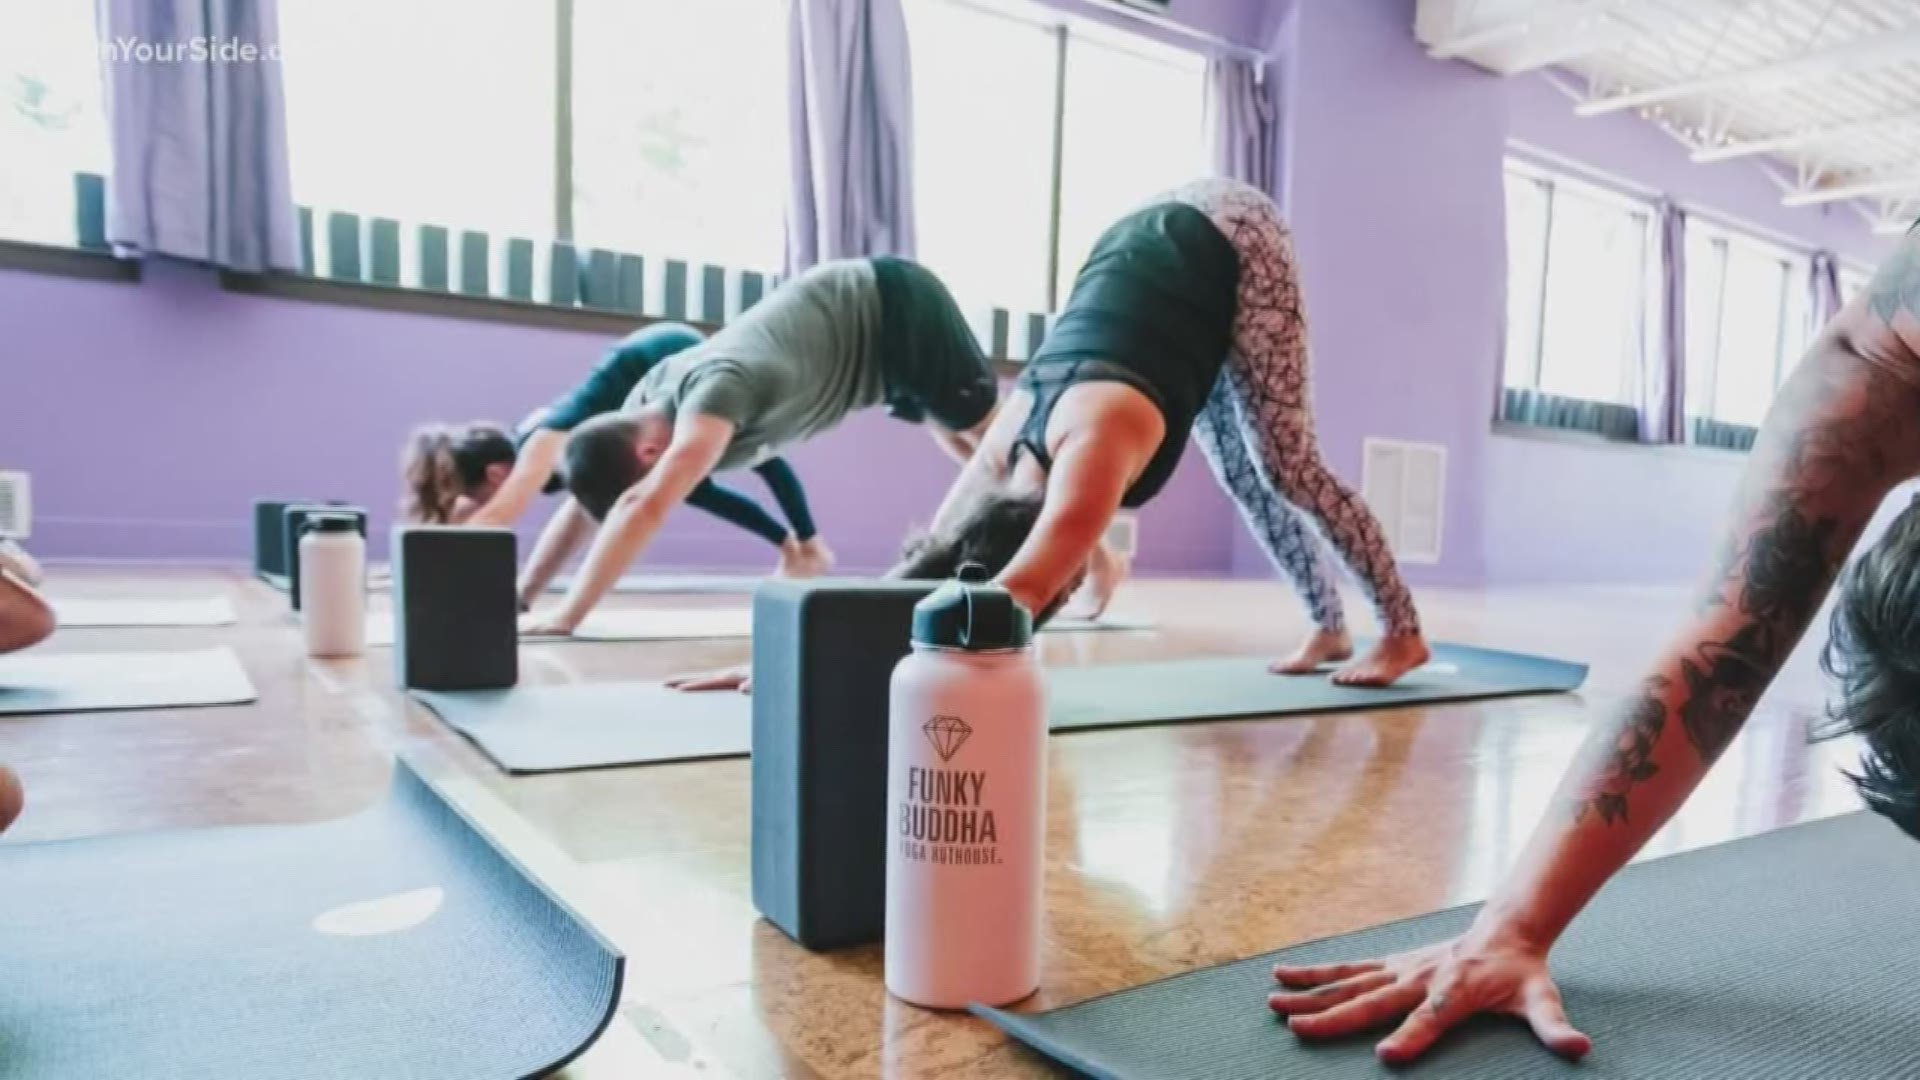 A local yoga studio is staying connected to clients during closures from coronavirus.